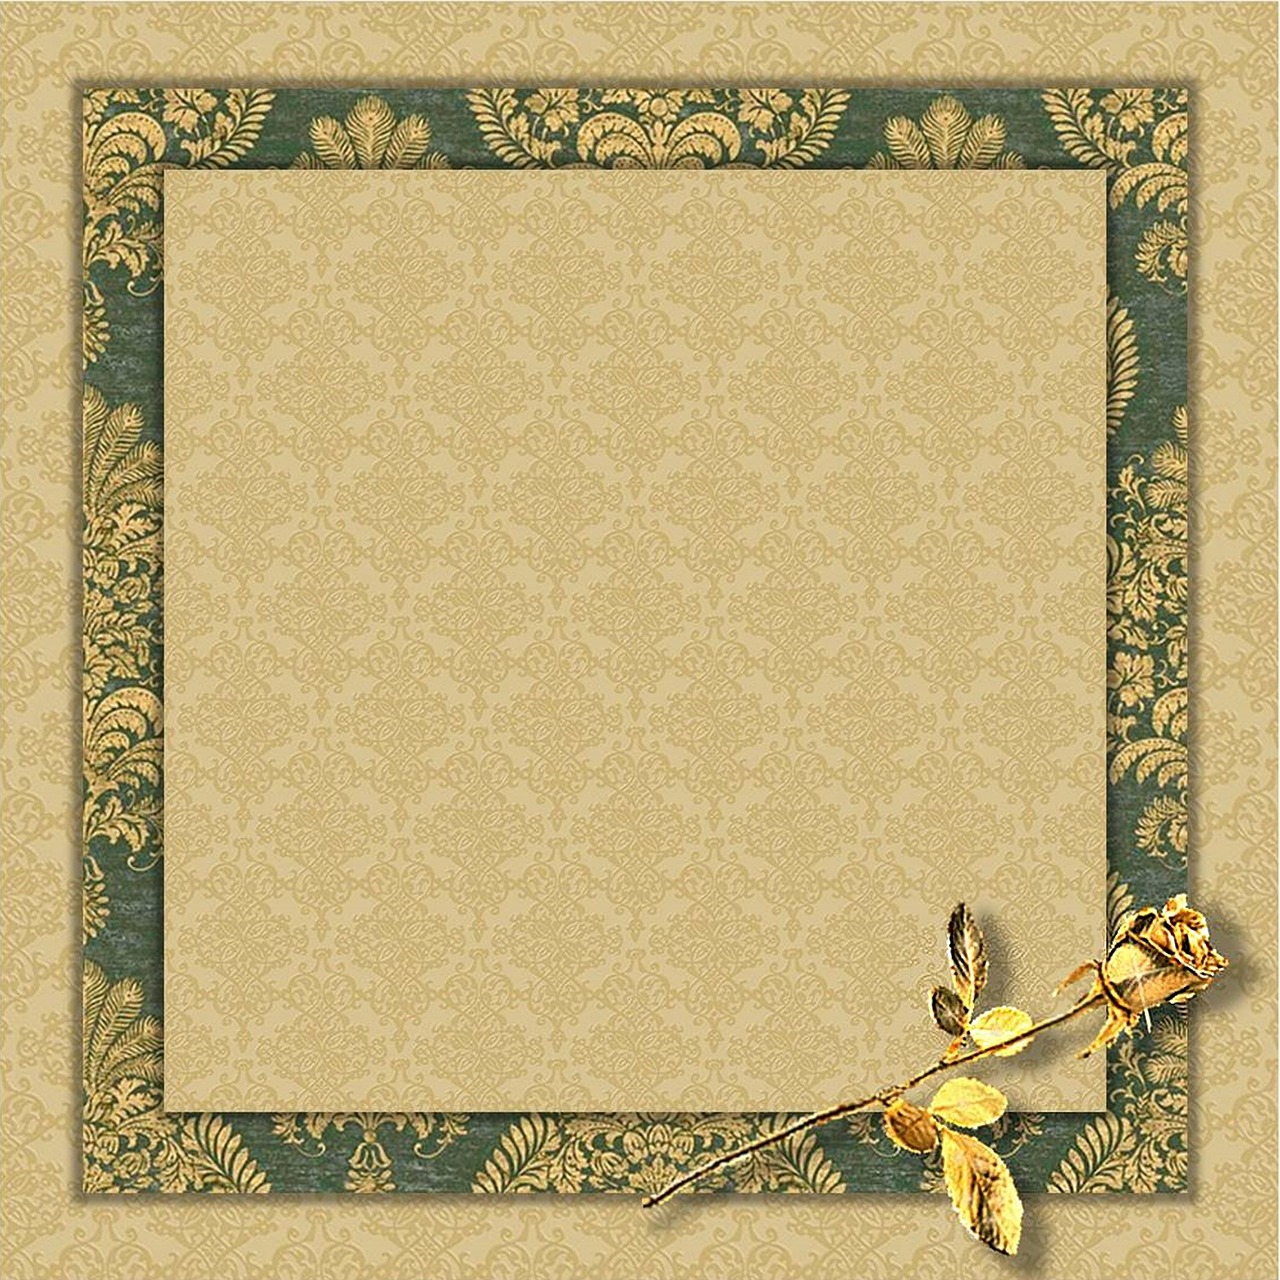 guestbook background green gold free photo